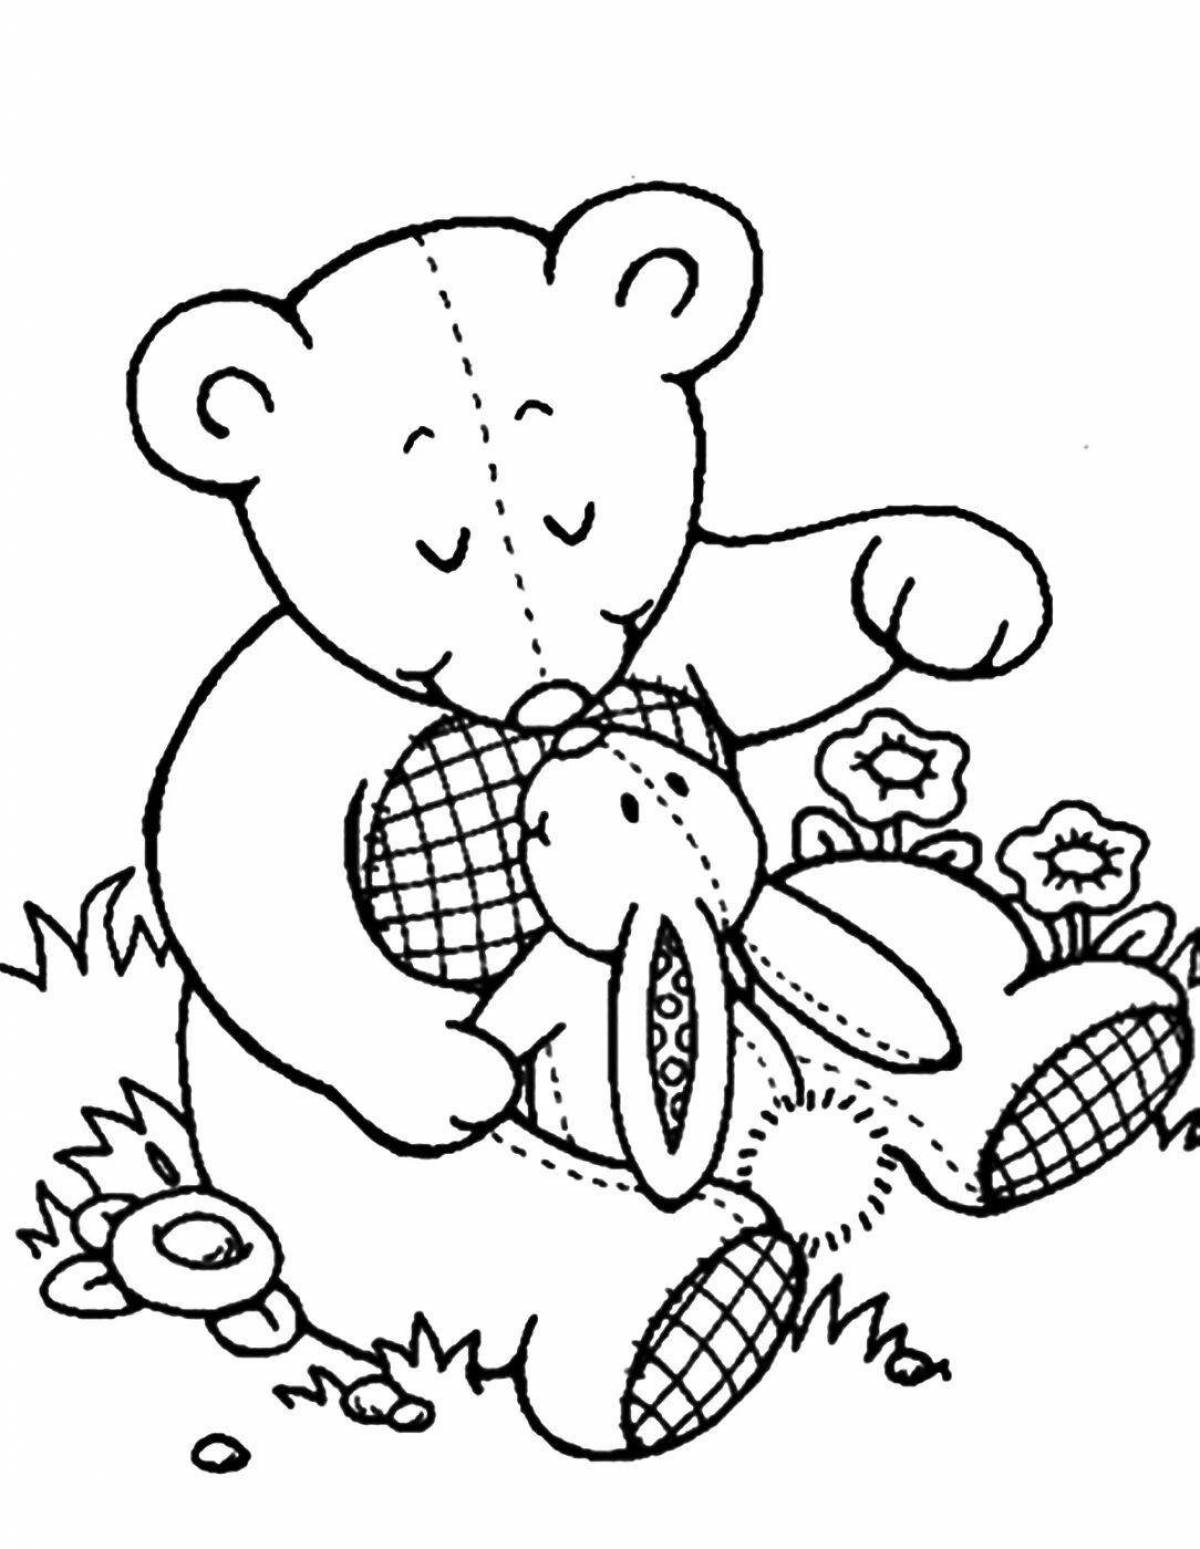 Glowing bear and hare coloring page